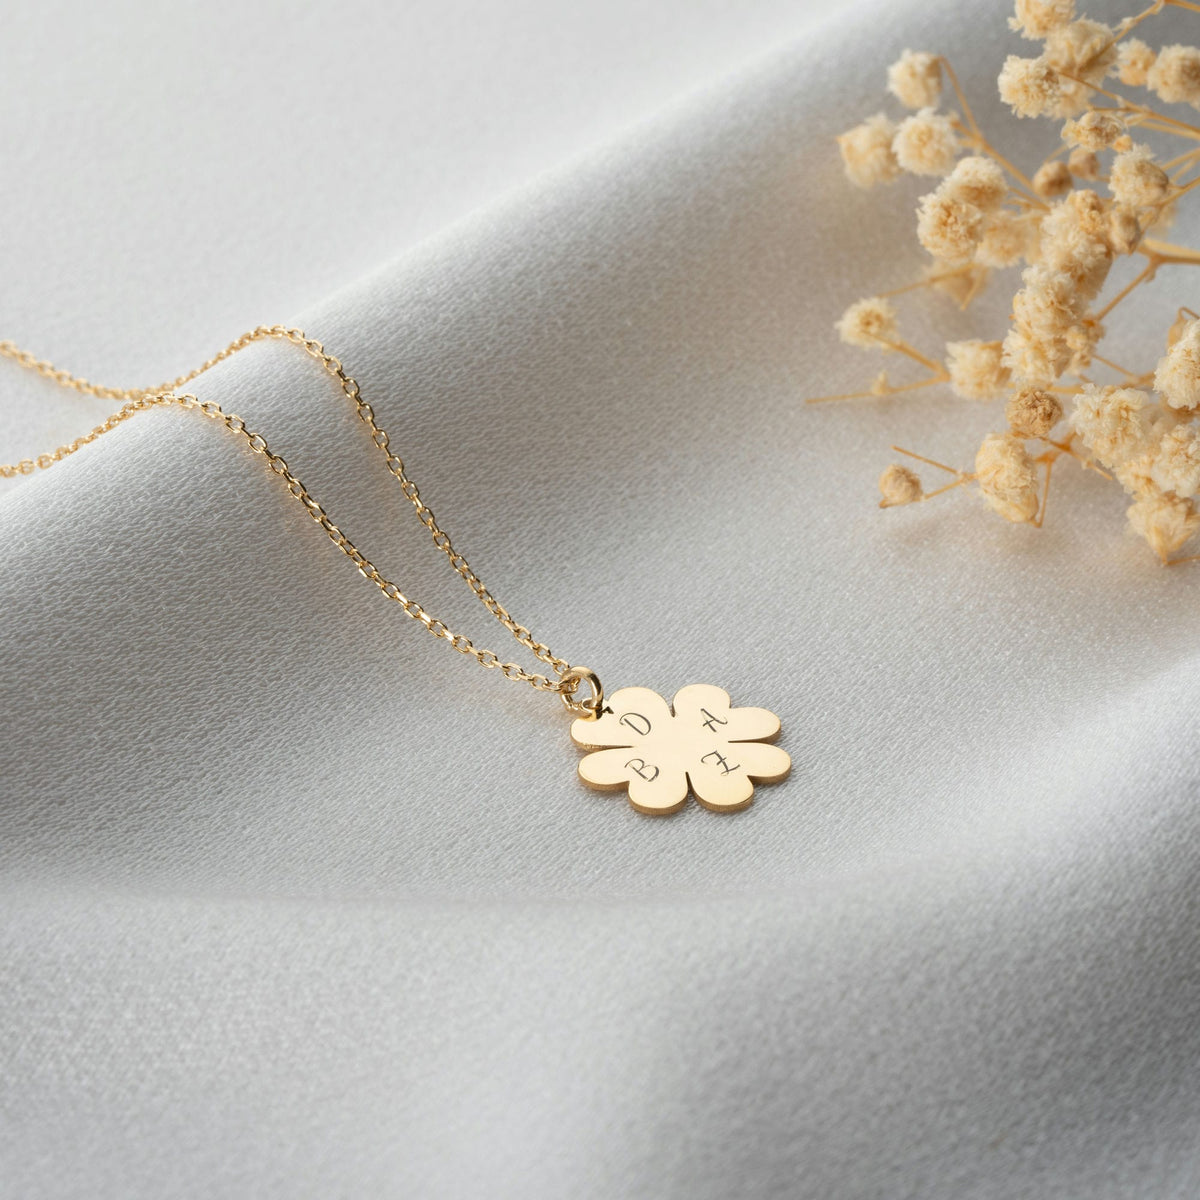 Four Leaf Clover Necklace With Initials